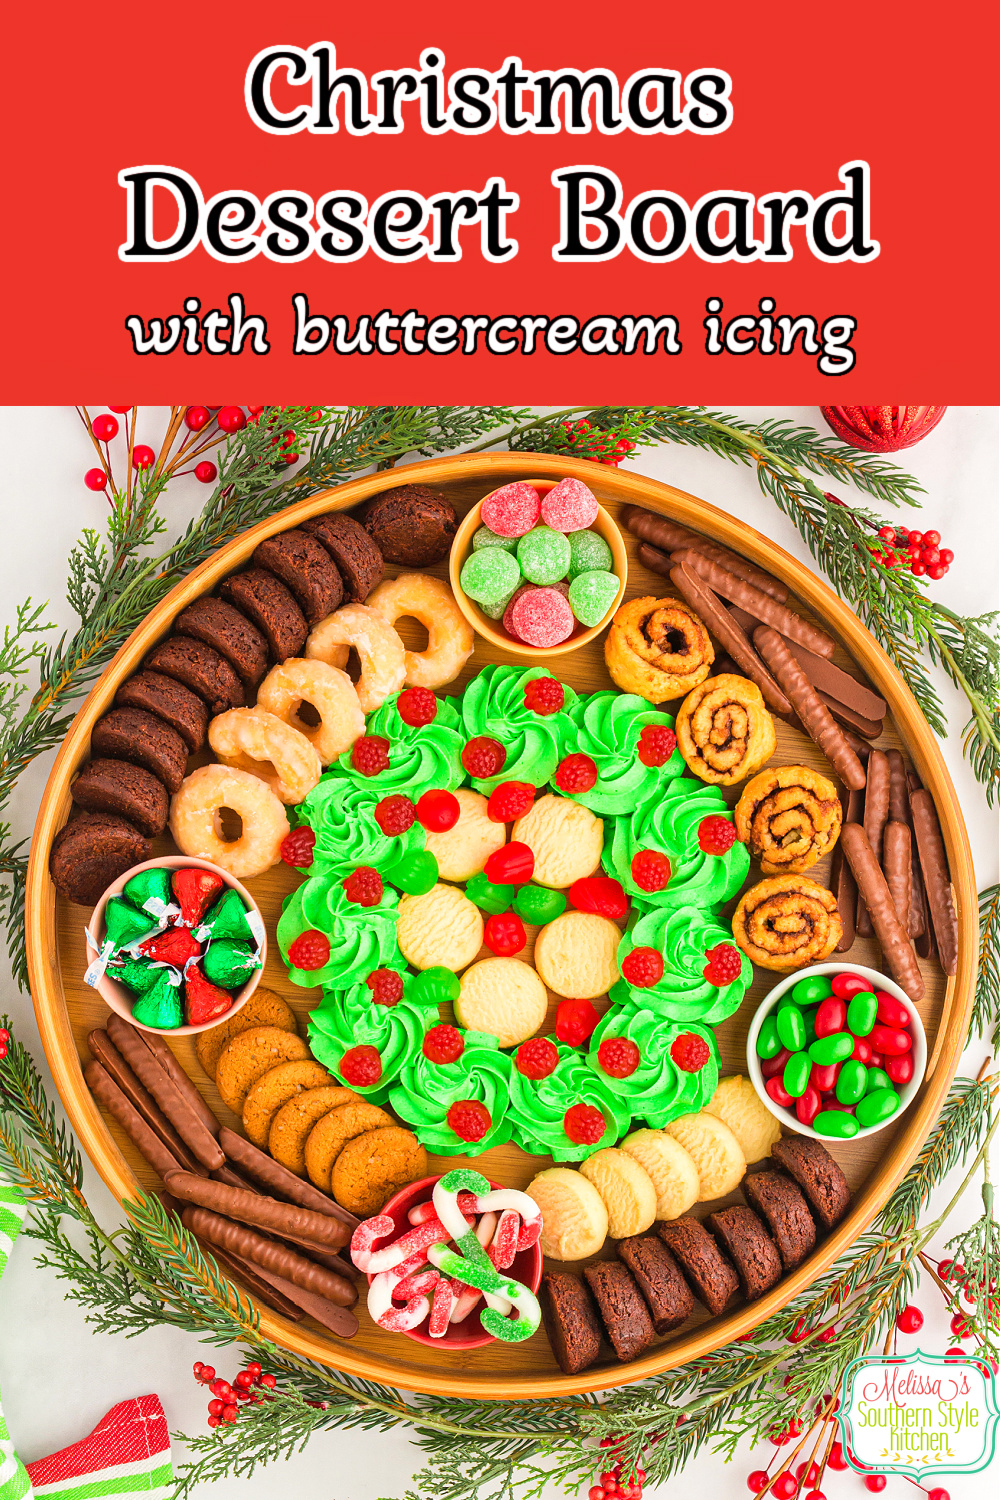 This stunning Christmas Dessert Board features a green tinted homemade buttercream frosting for dipping your favorite cookies and treats. #butterboard #buttercreamfrosting #vanillafrosting #charcuterie #desserts #dessertboard #christmasdesserts #candy #cookies #chocolate